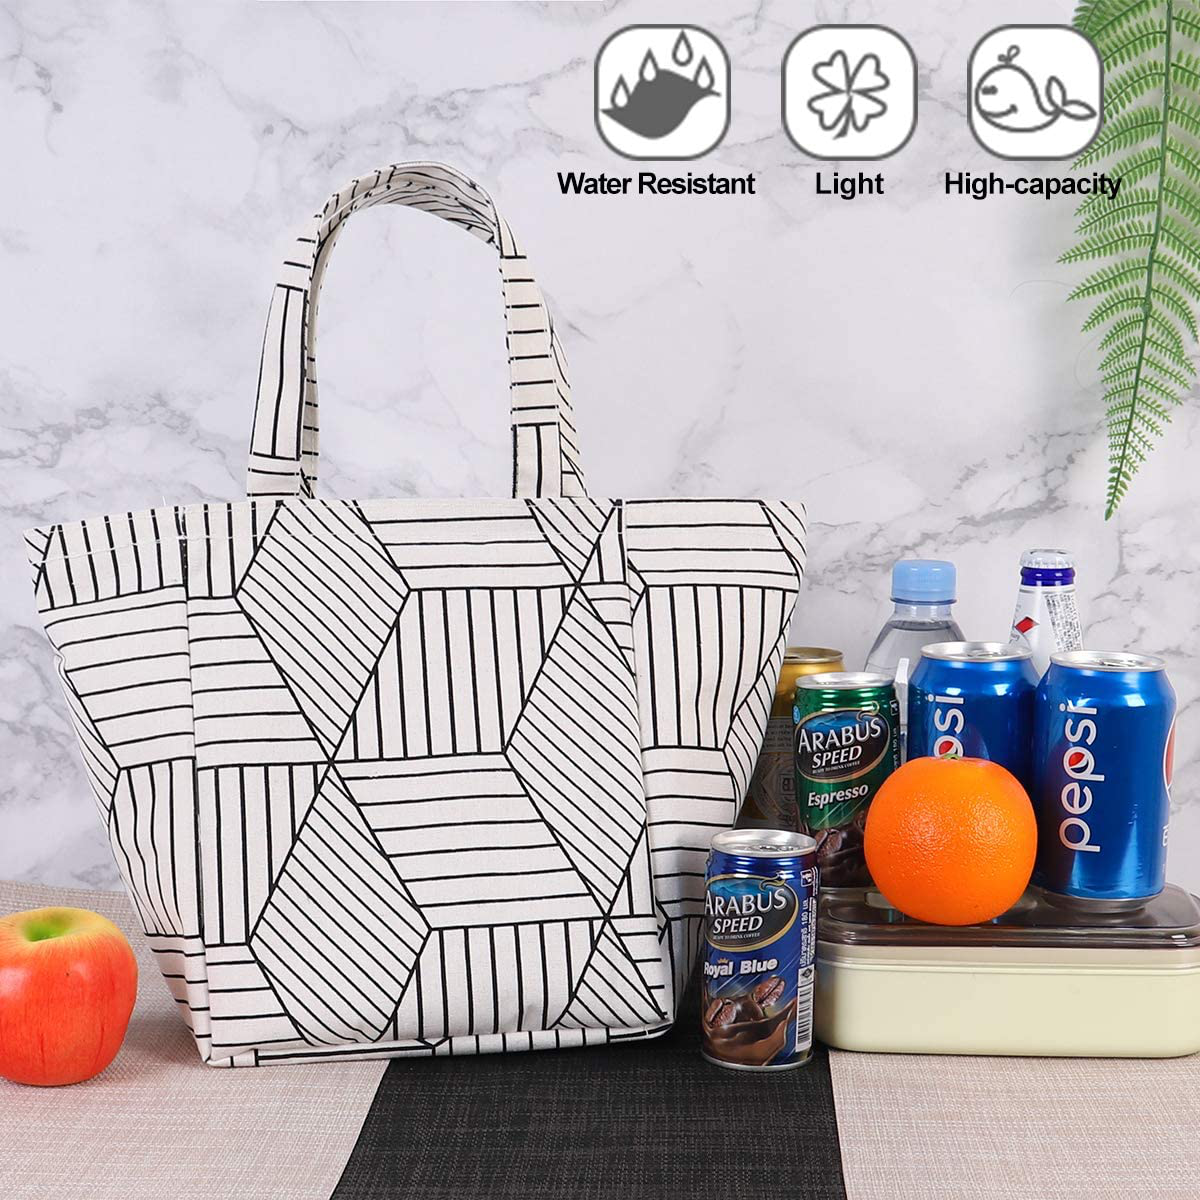 Buringer Insulated Lunch Bag with Inner Pocket Printed Canvas Fabric Reusable Cooler Tote Box for Ladies Woman Man School Work Picnic (Upgraded White Plaid)